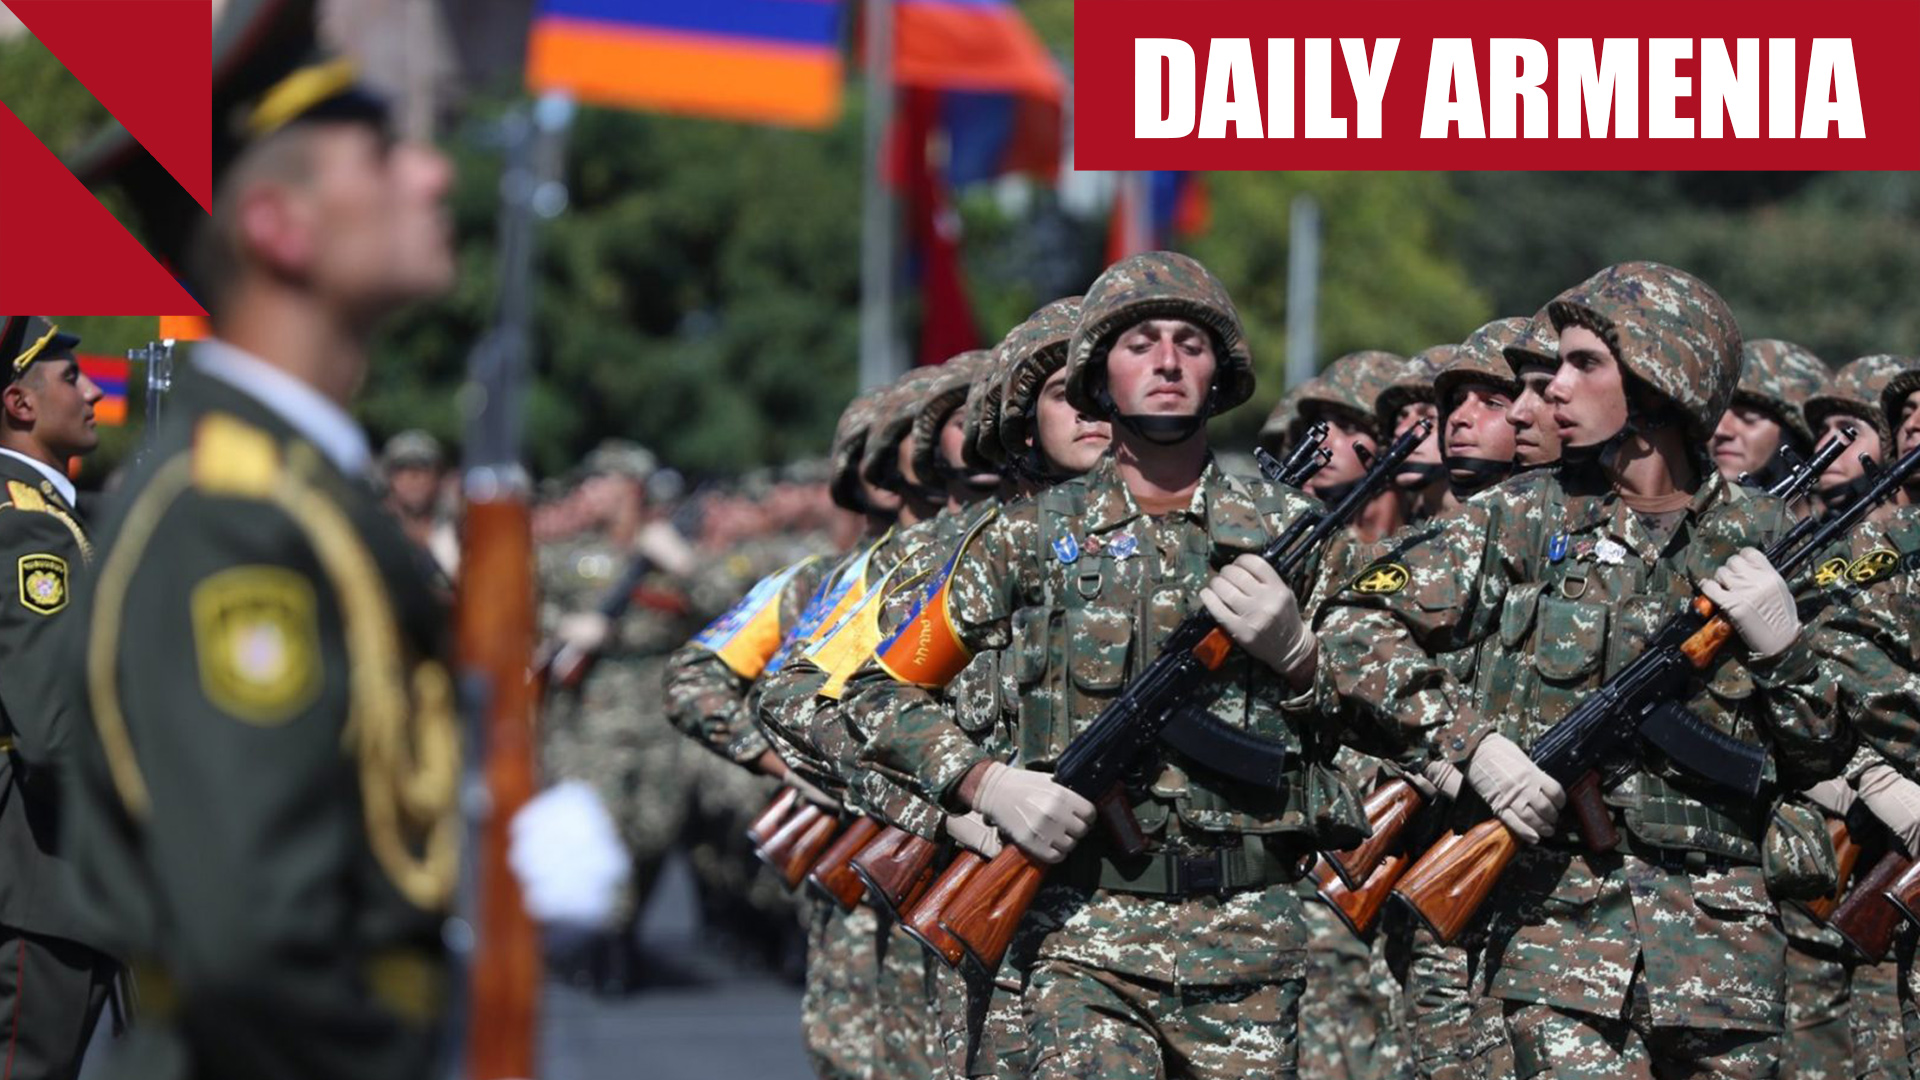 EU and UK express readiness to strengthen defense ties with Armenia